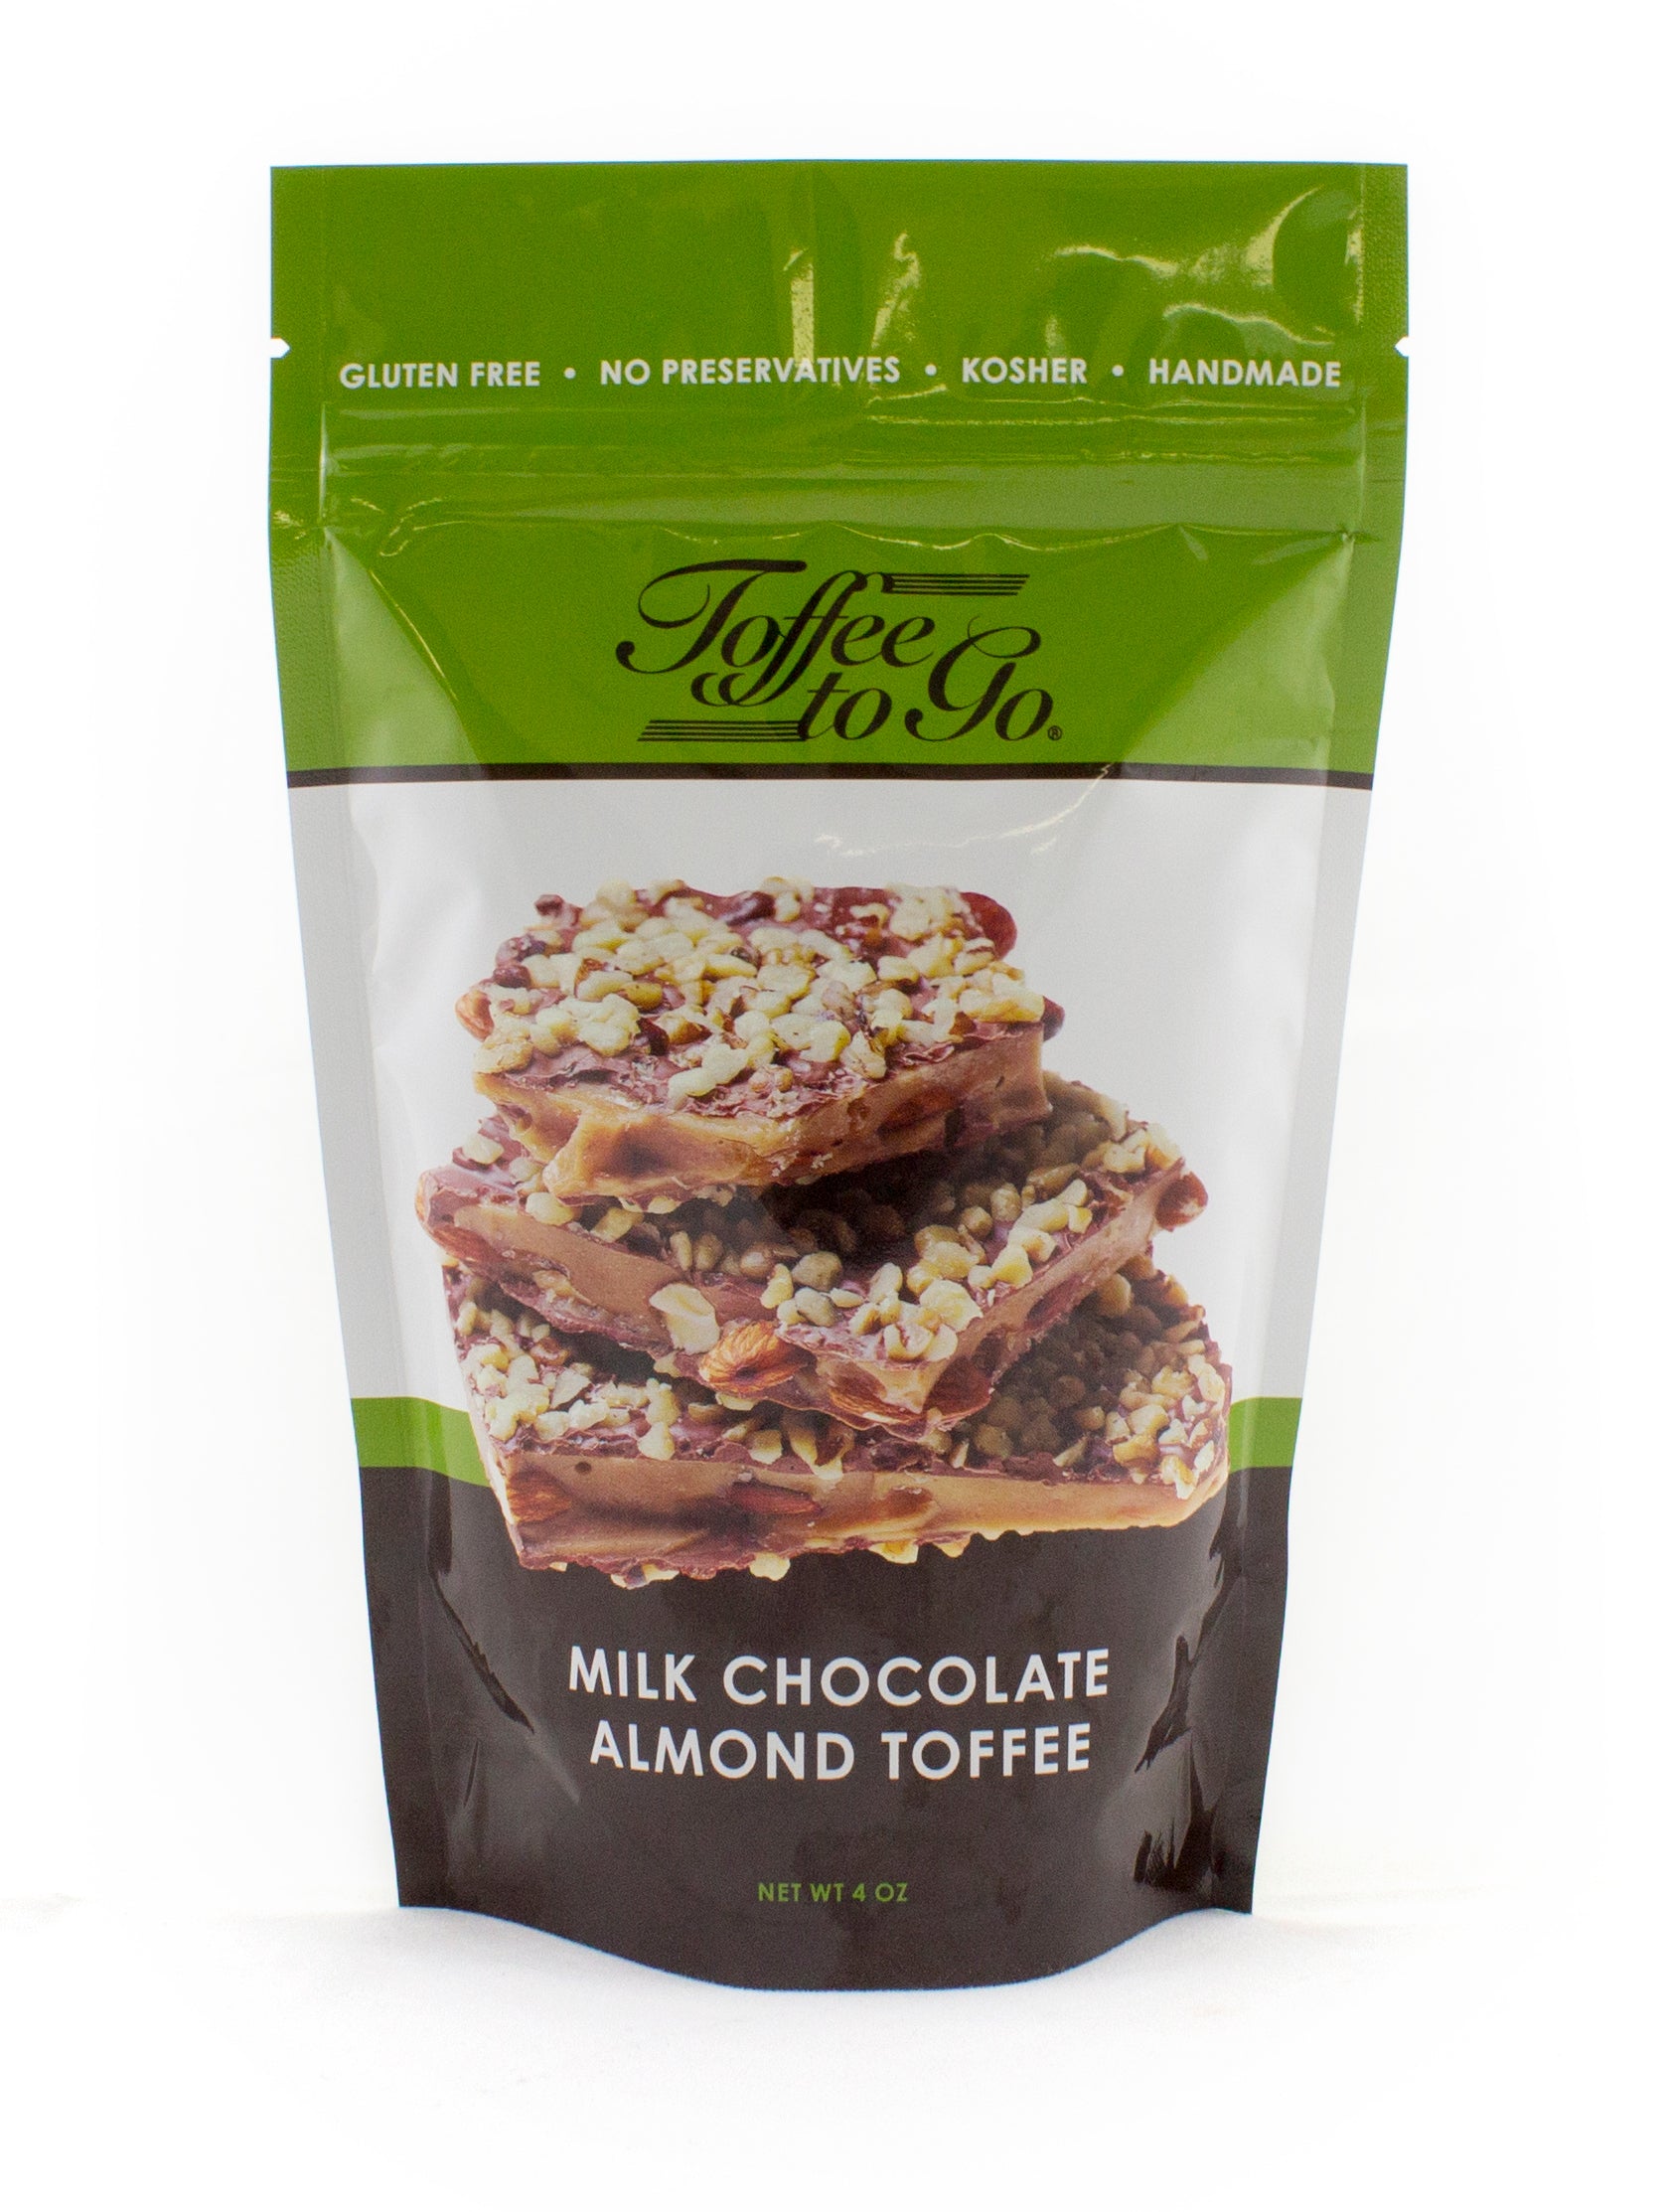 Resealable Bag of Milk Chocolate Almond Toffee